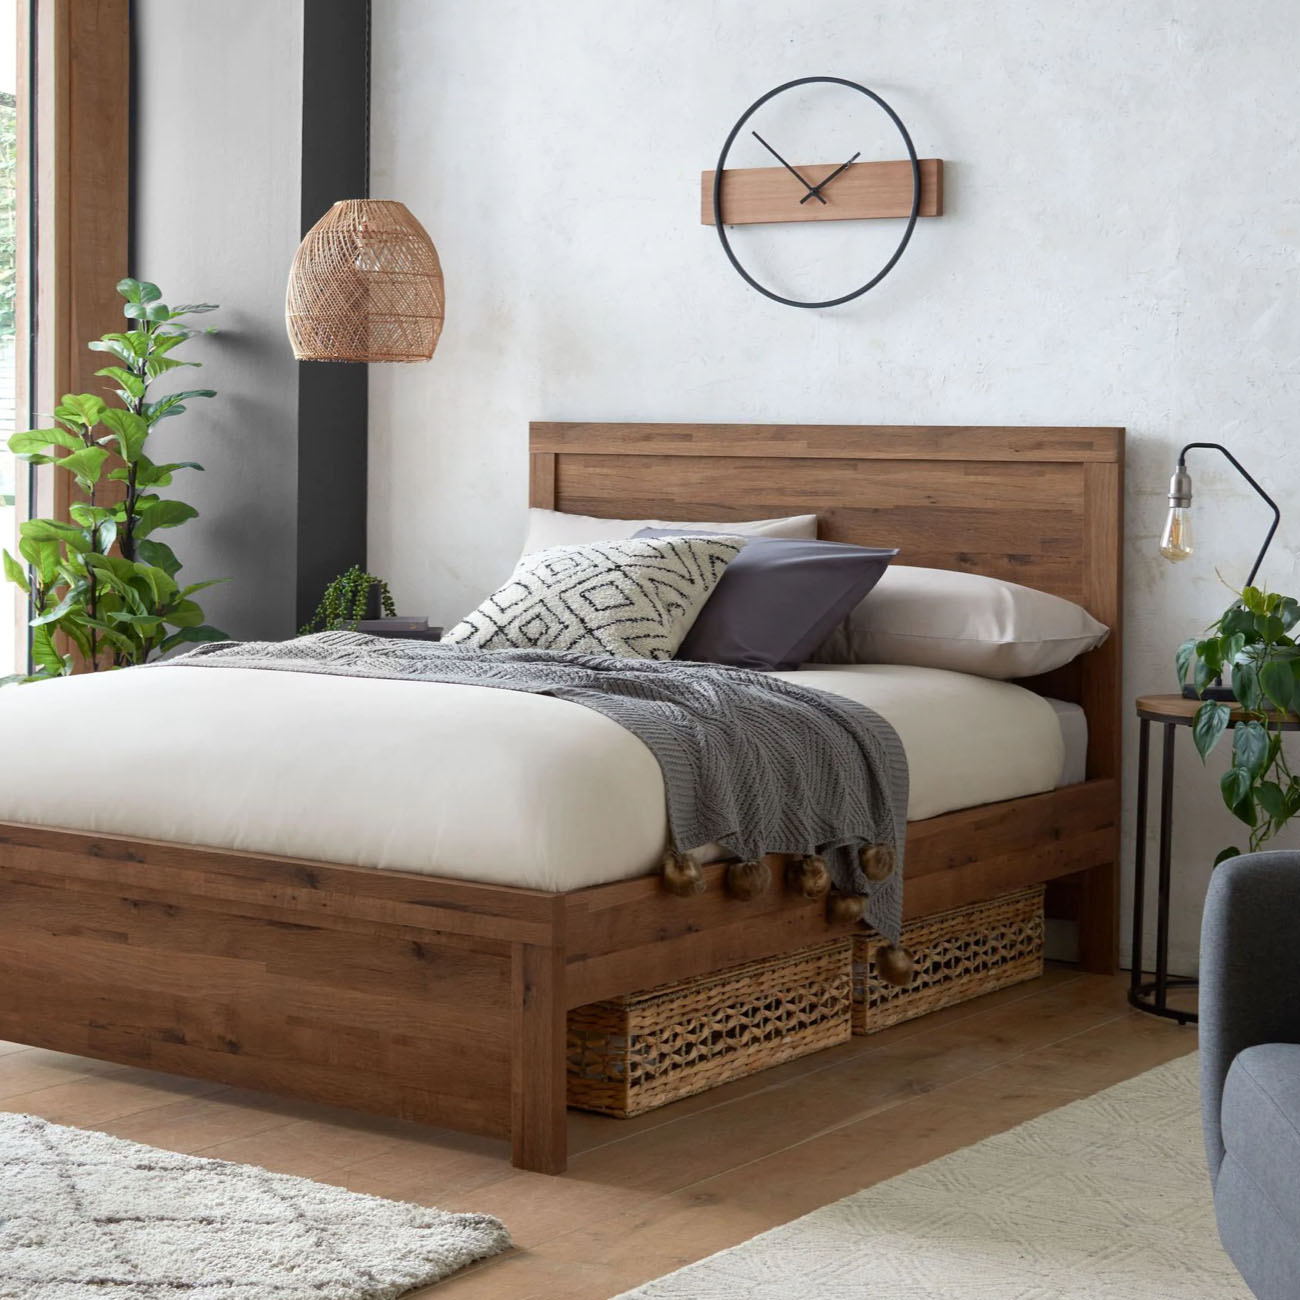 A Bed Buying Guide: How to Choose The Right Bed | Next UK